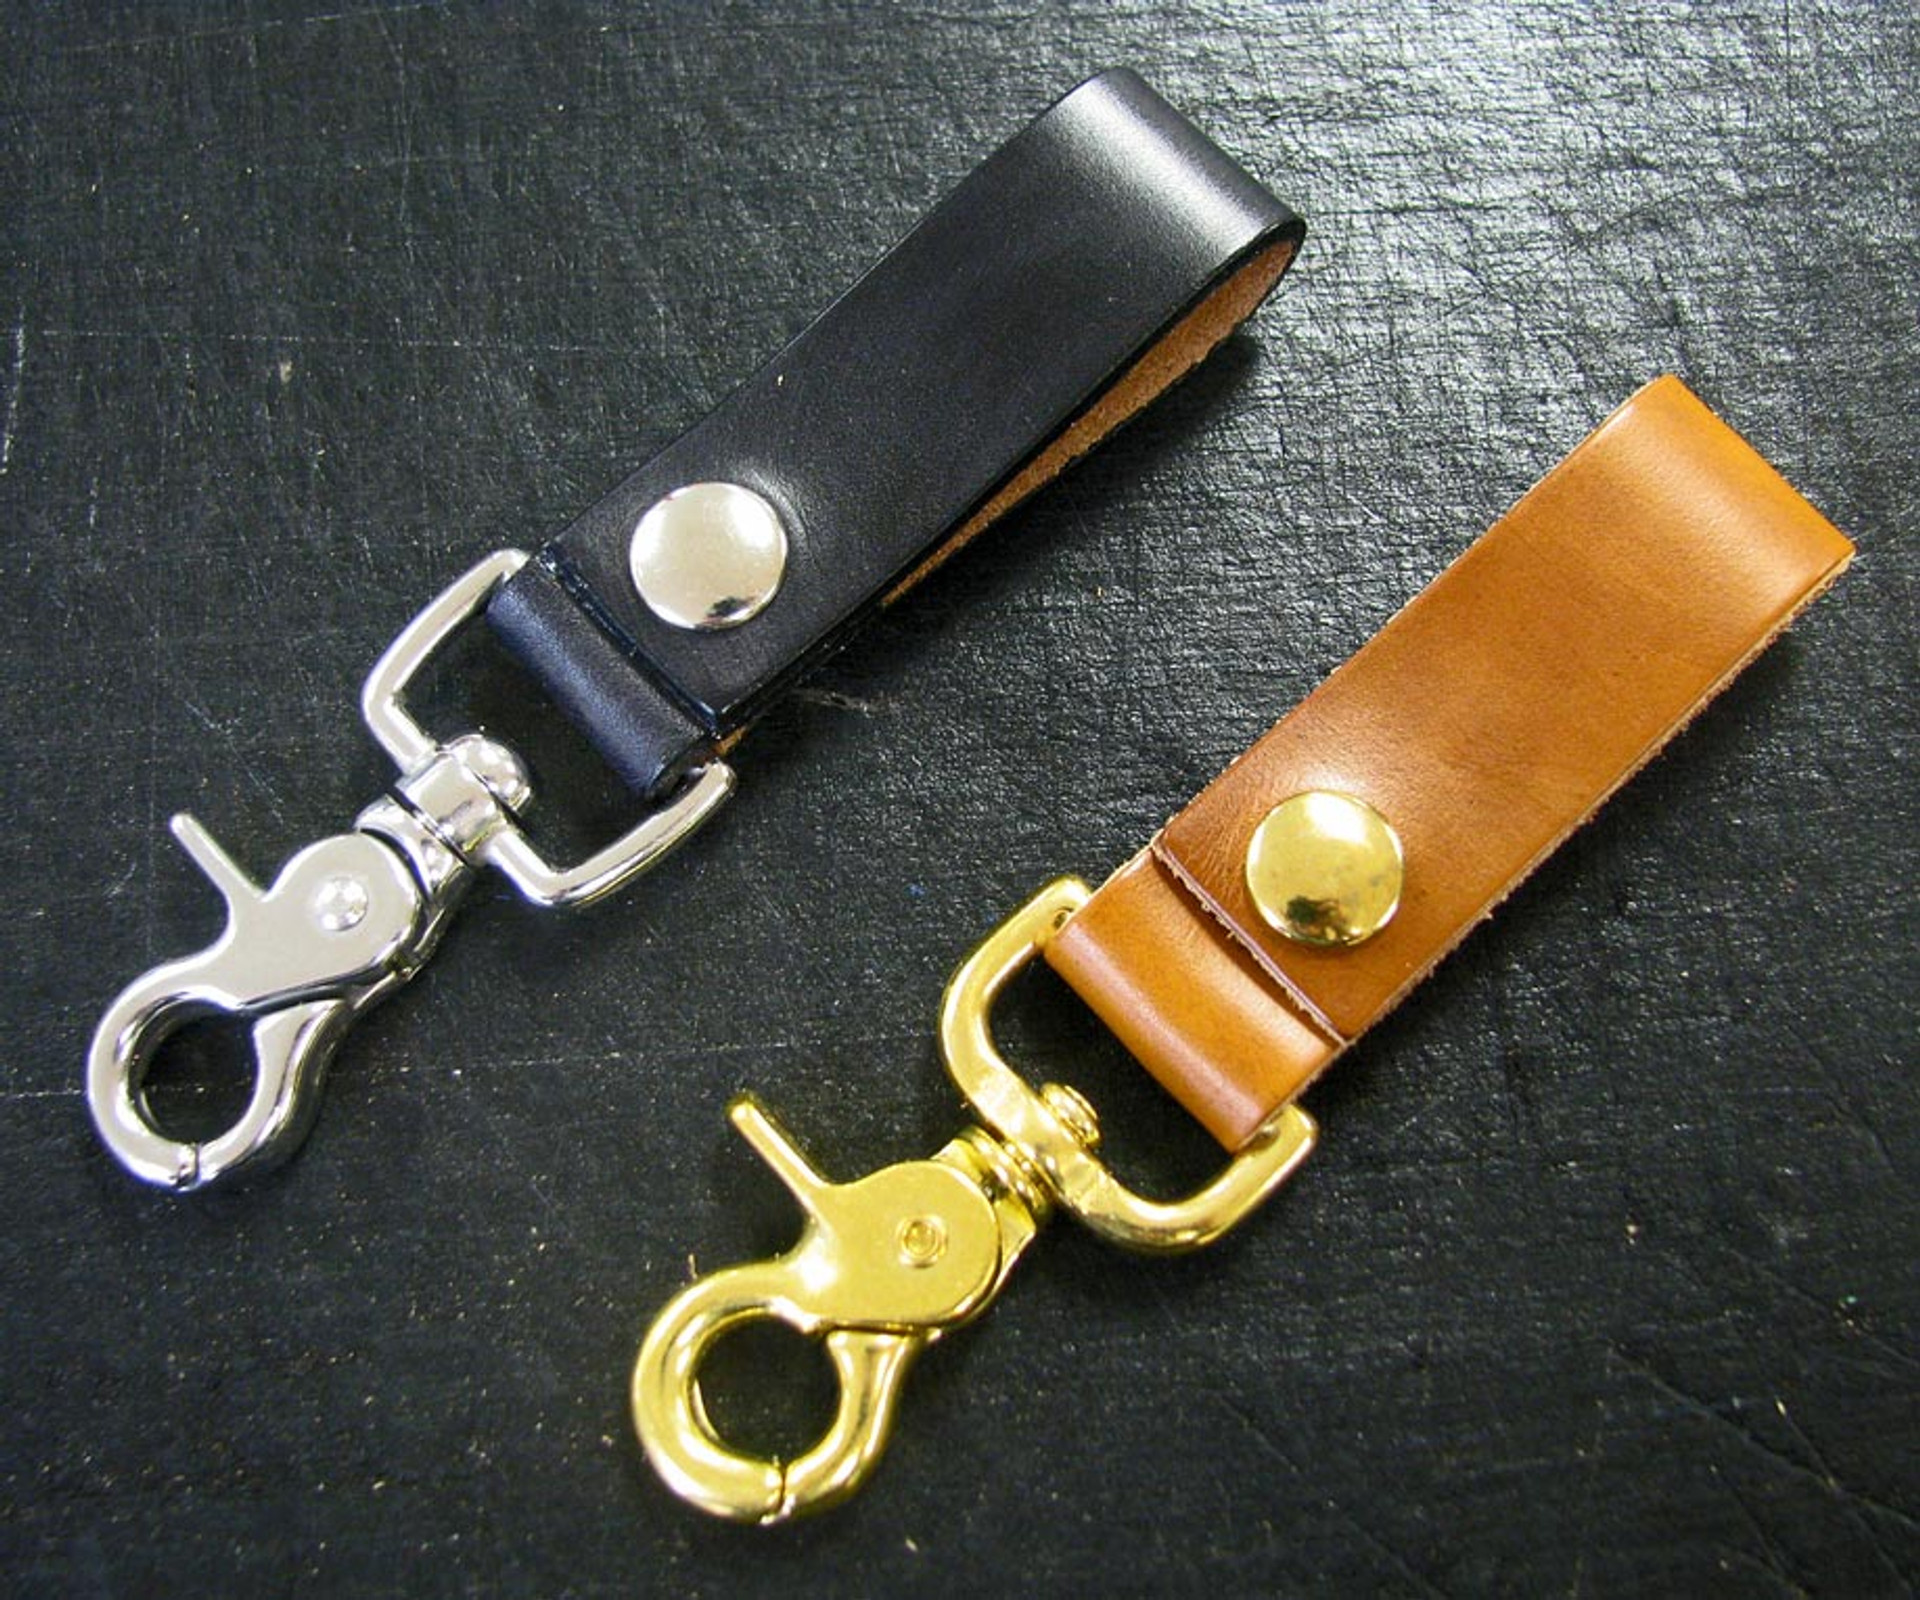 How To Make A Leather Belt Key Holder - Leathersmith Designs Inc.